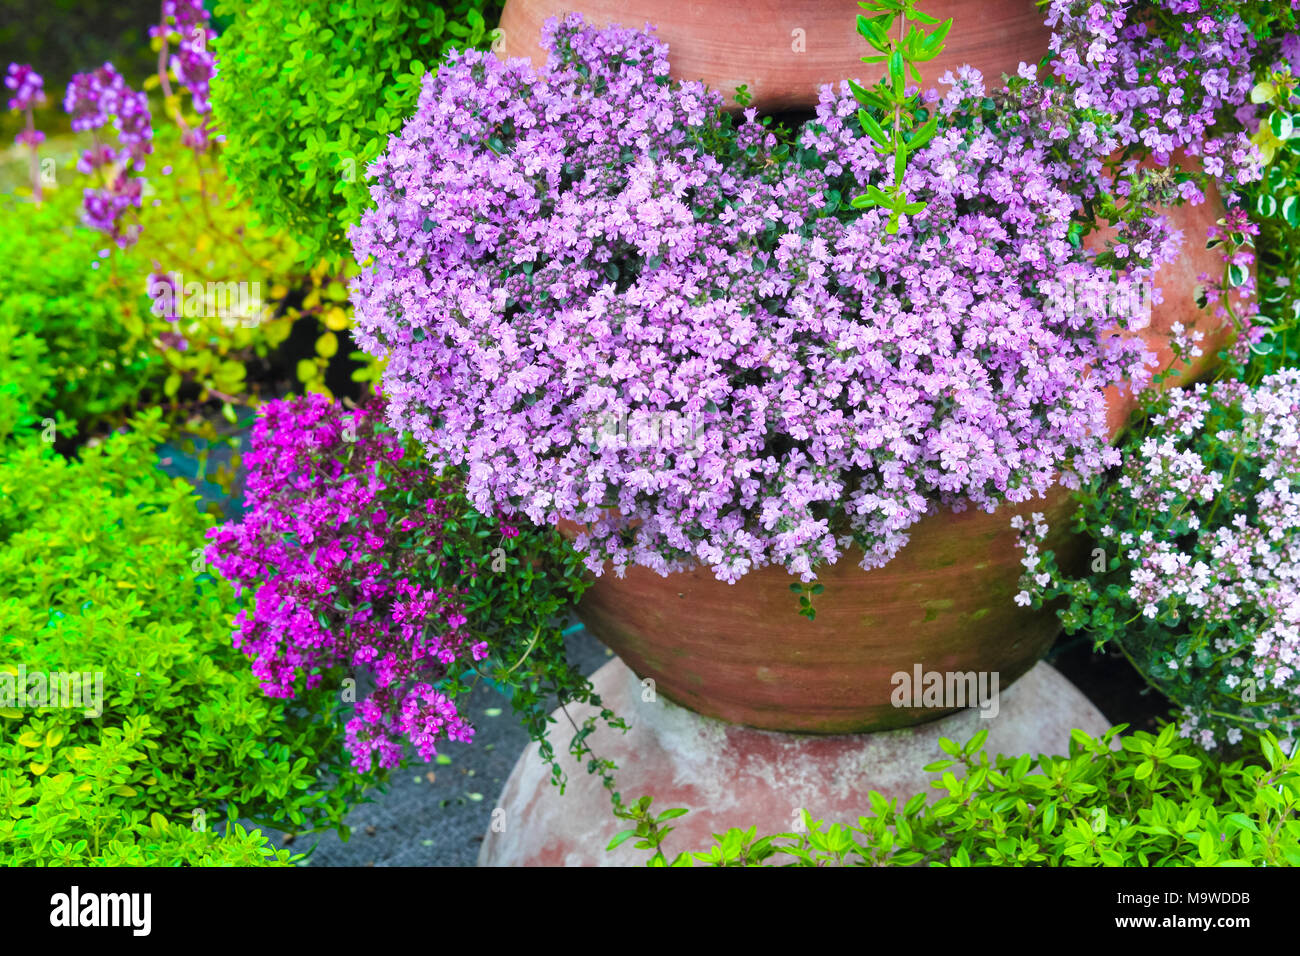 Variety Of Thyme Flowers Blooming In The Garden Flowerpot Stock